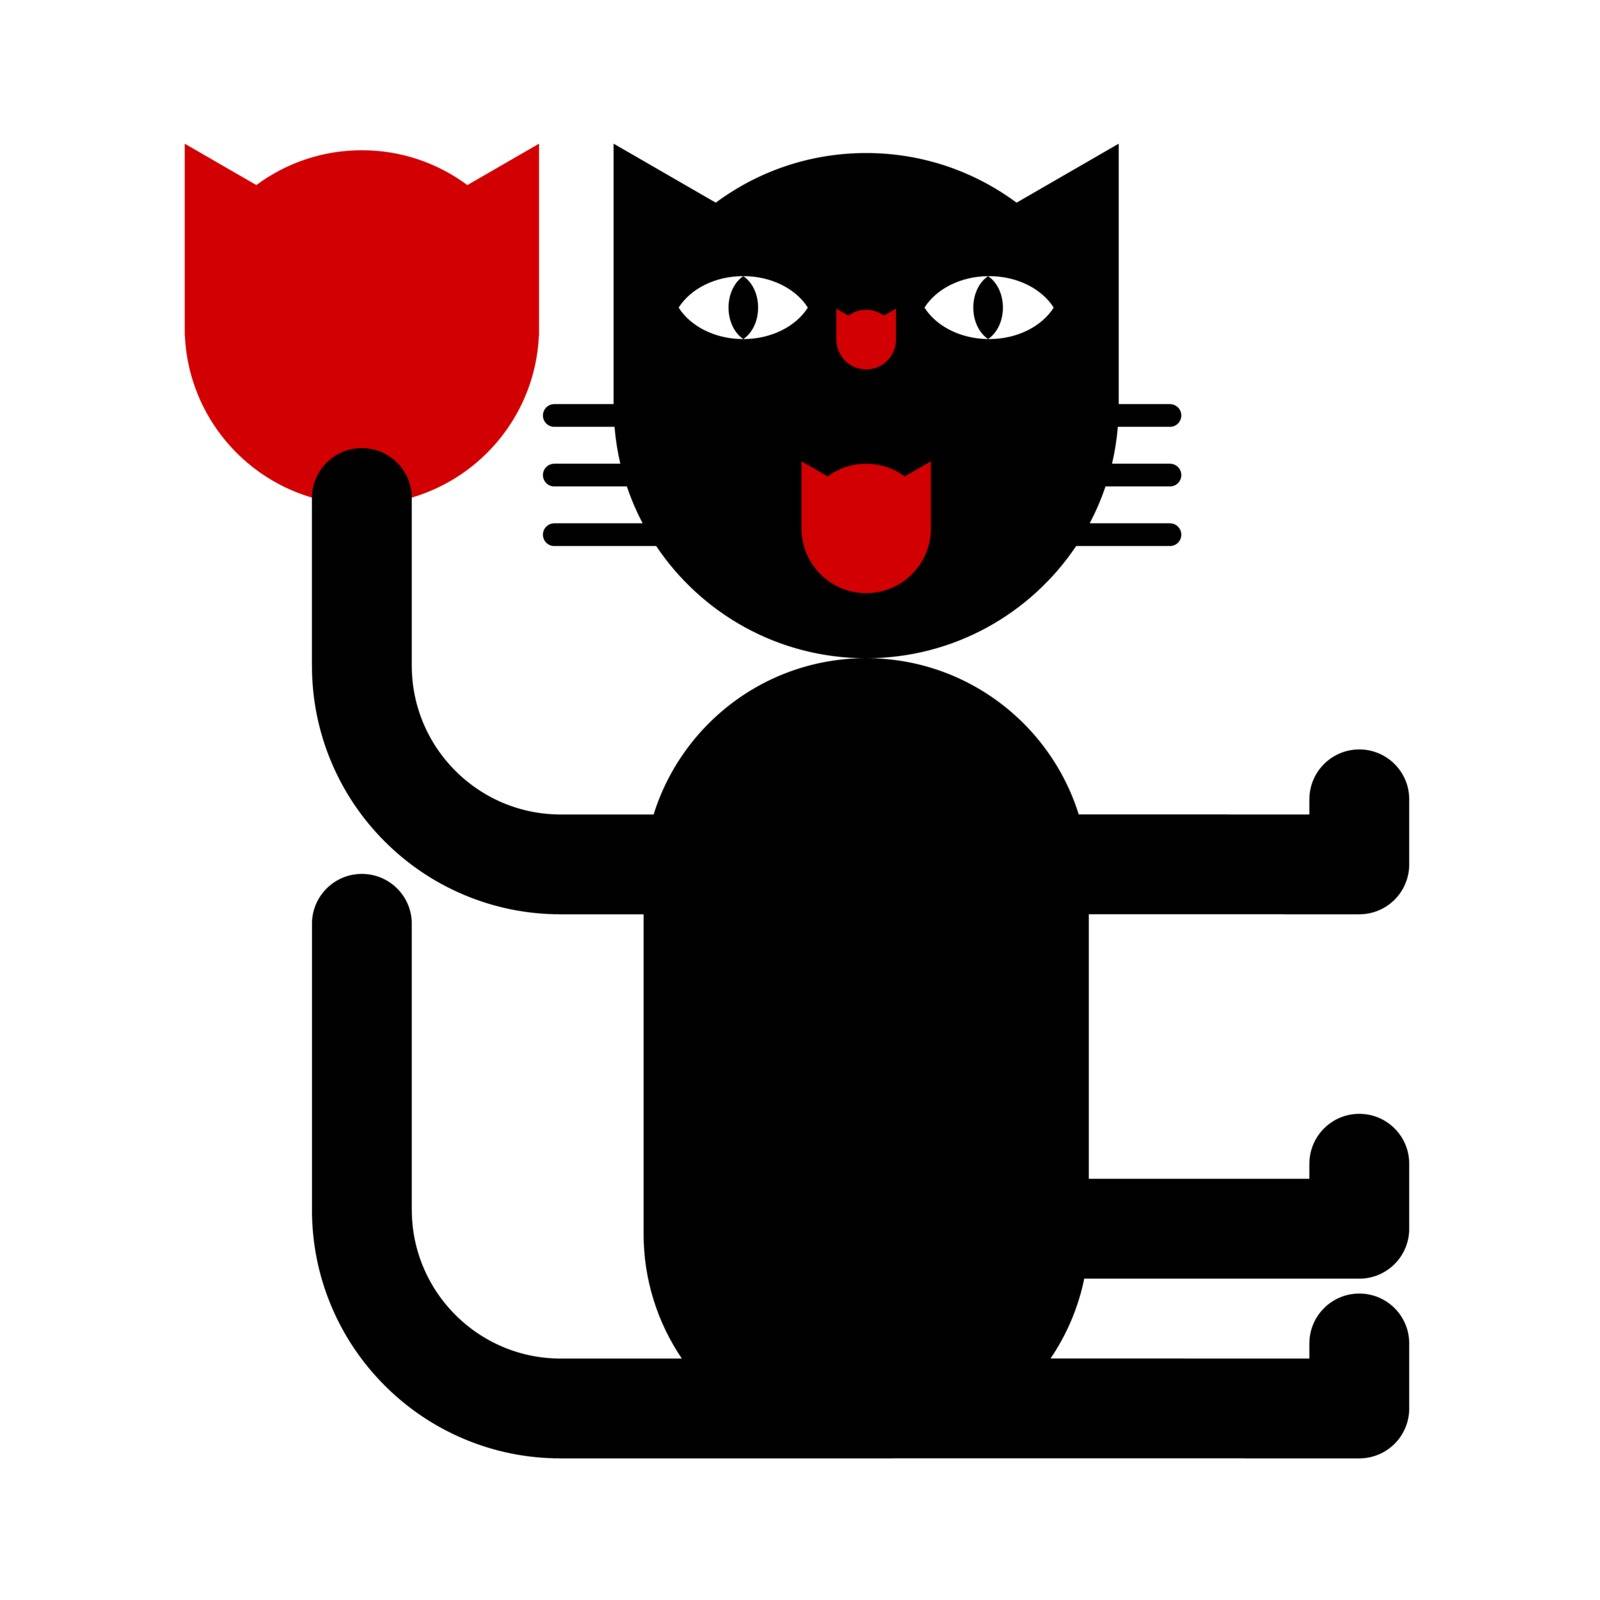 Cat with tulip. Vector graphic in geometric, playful and humorous style on isolated background.